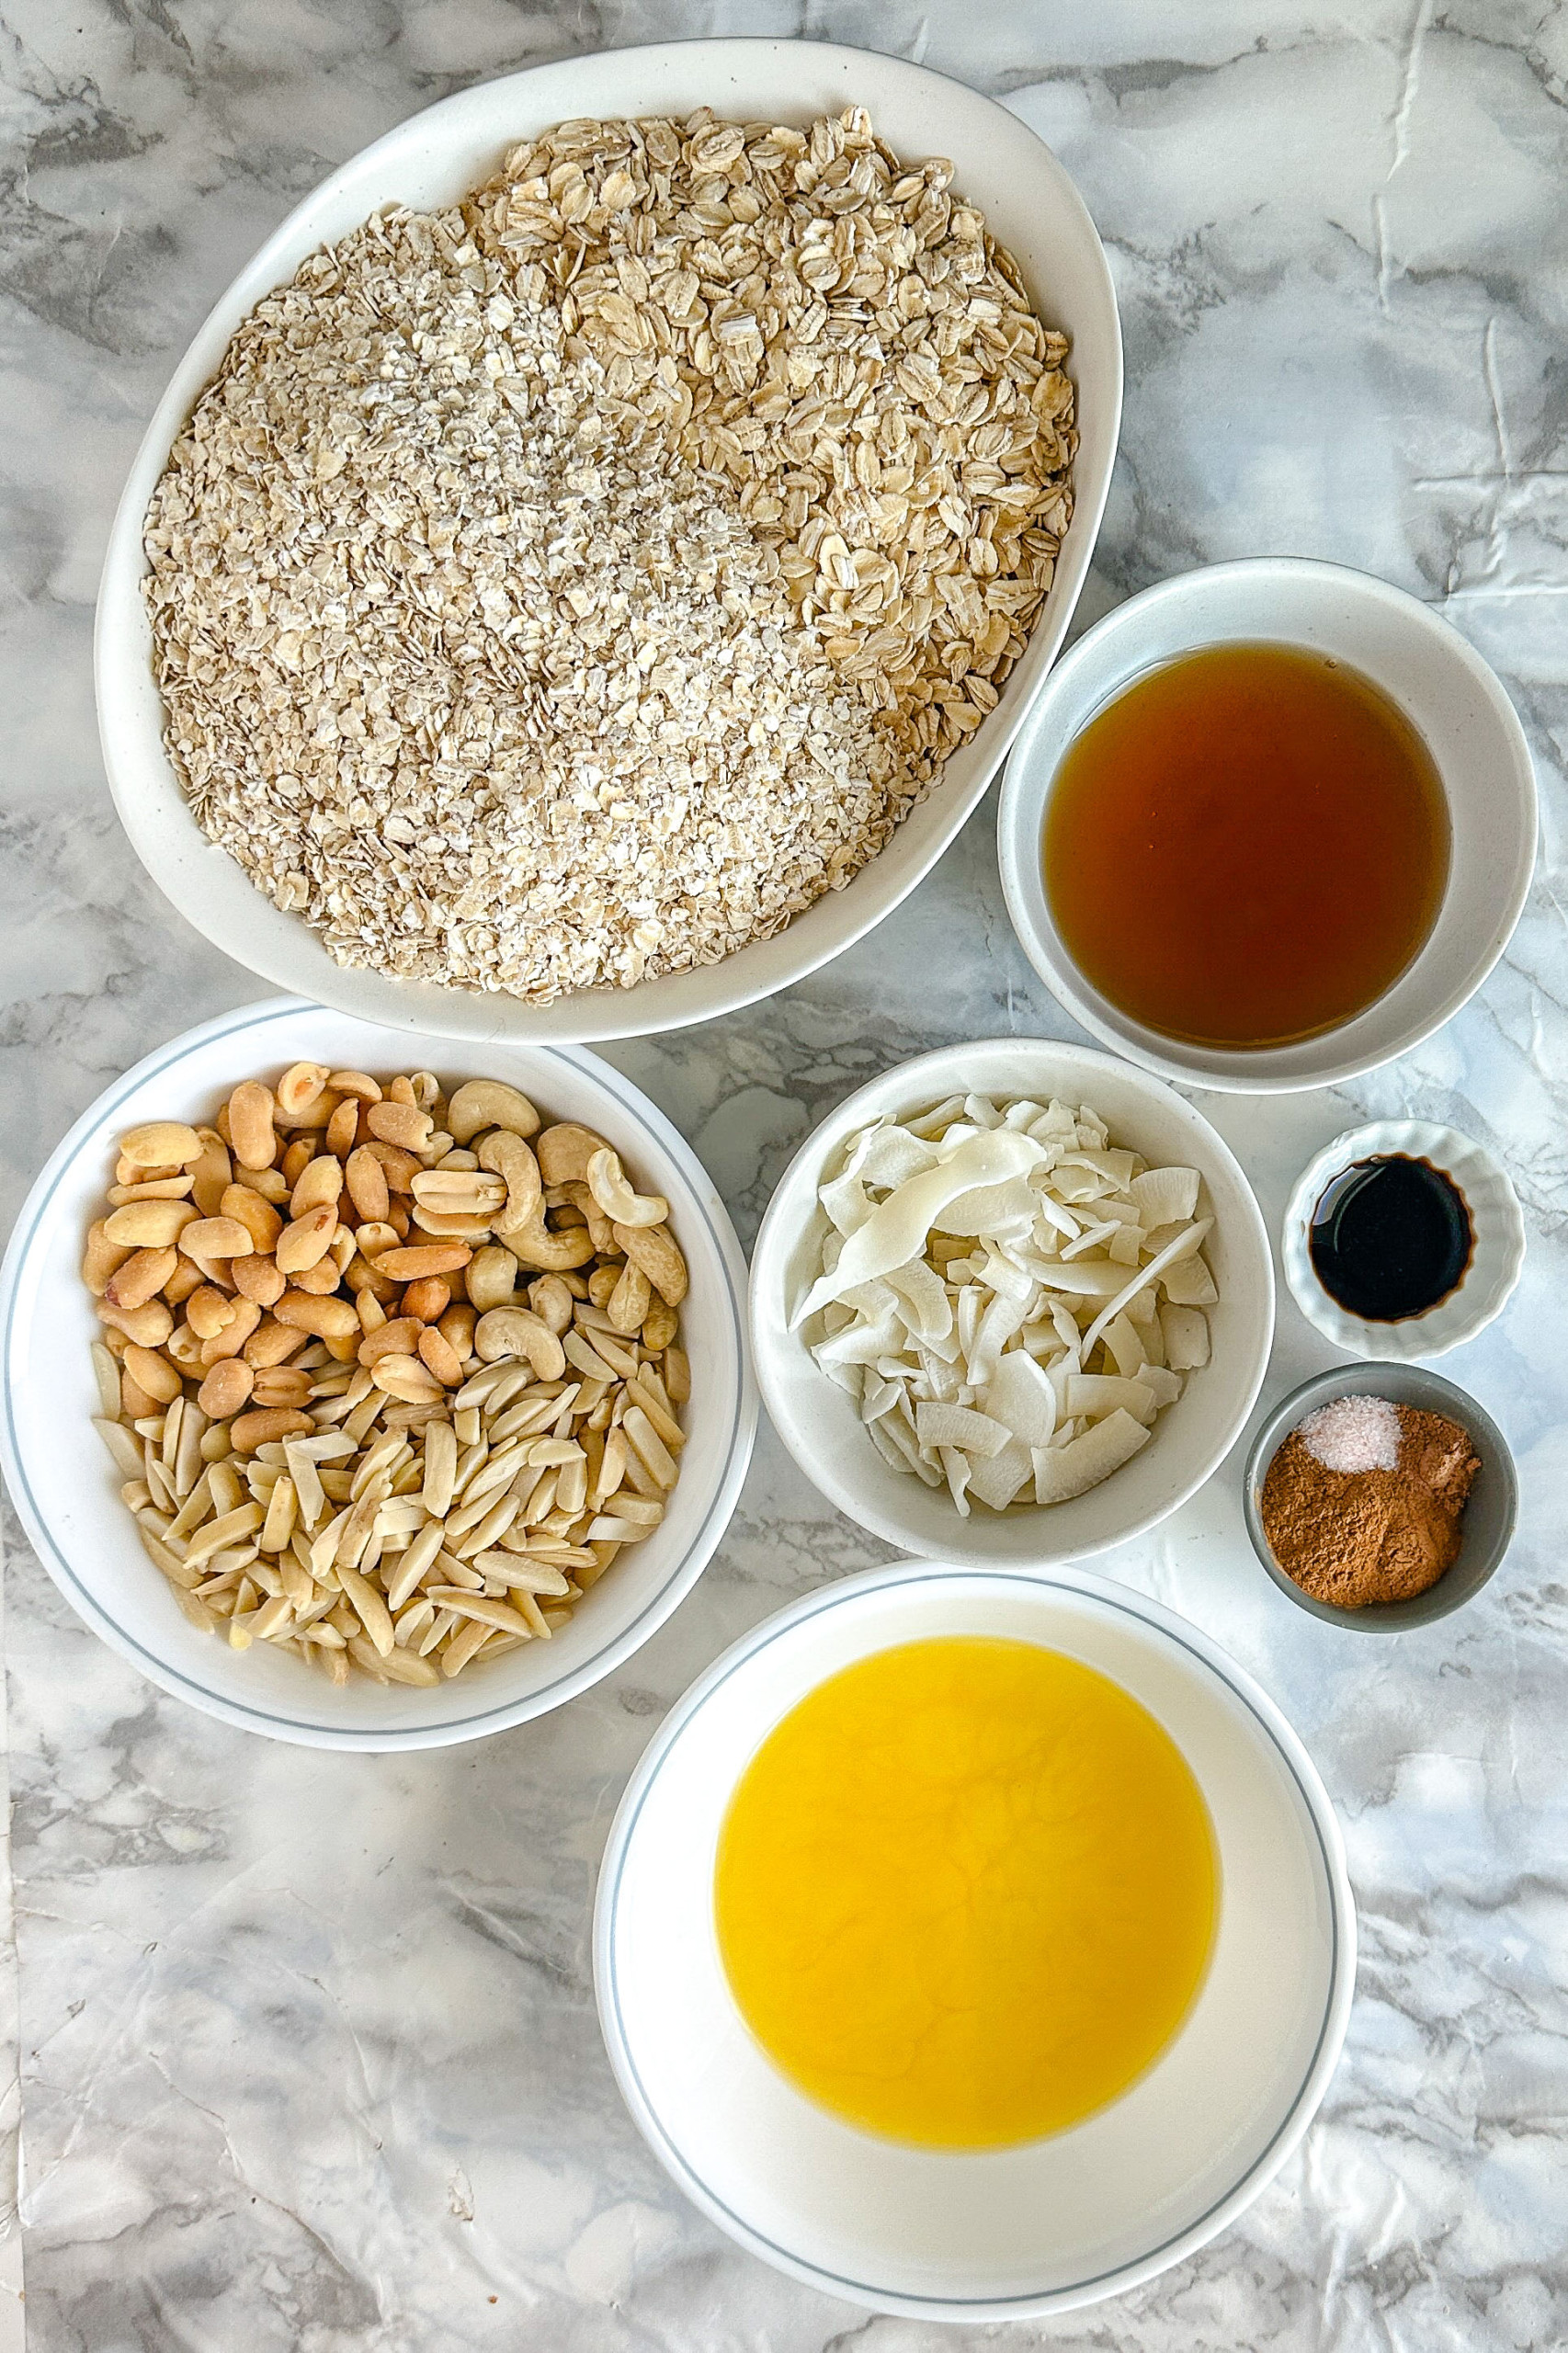 Ingredients for granola in bowls on a white marble counter.